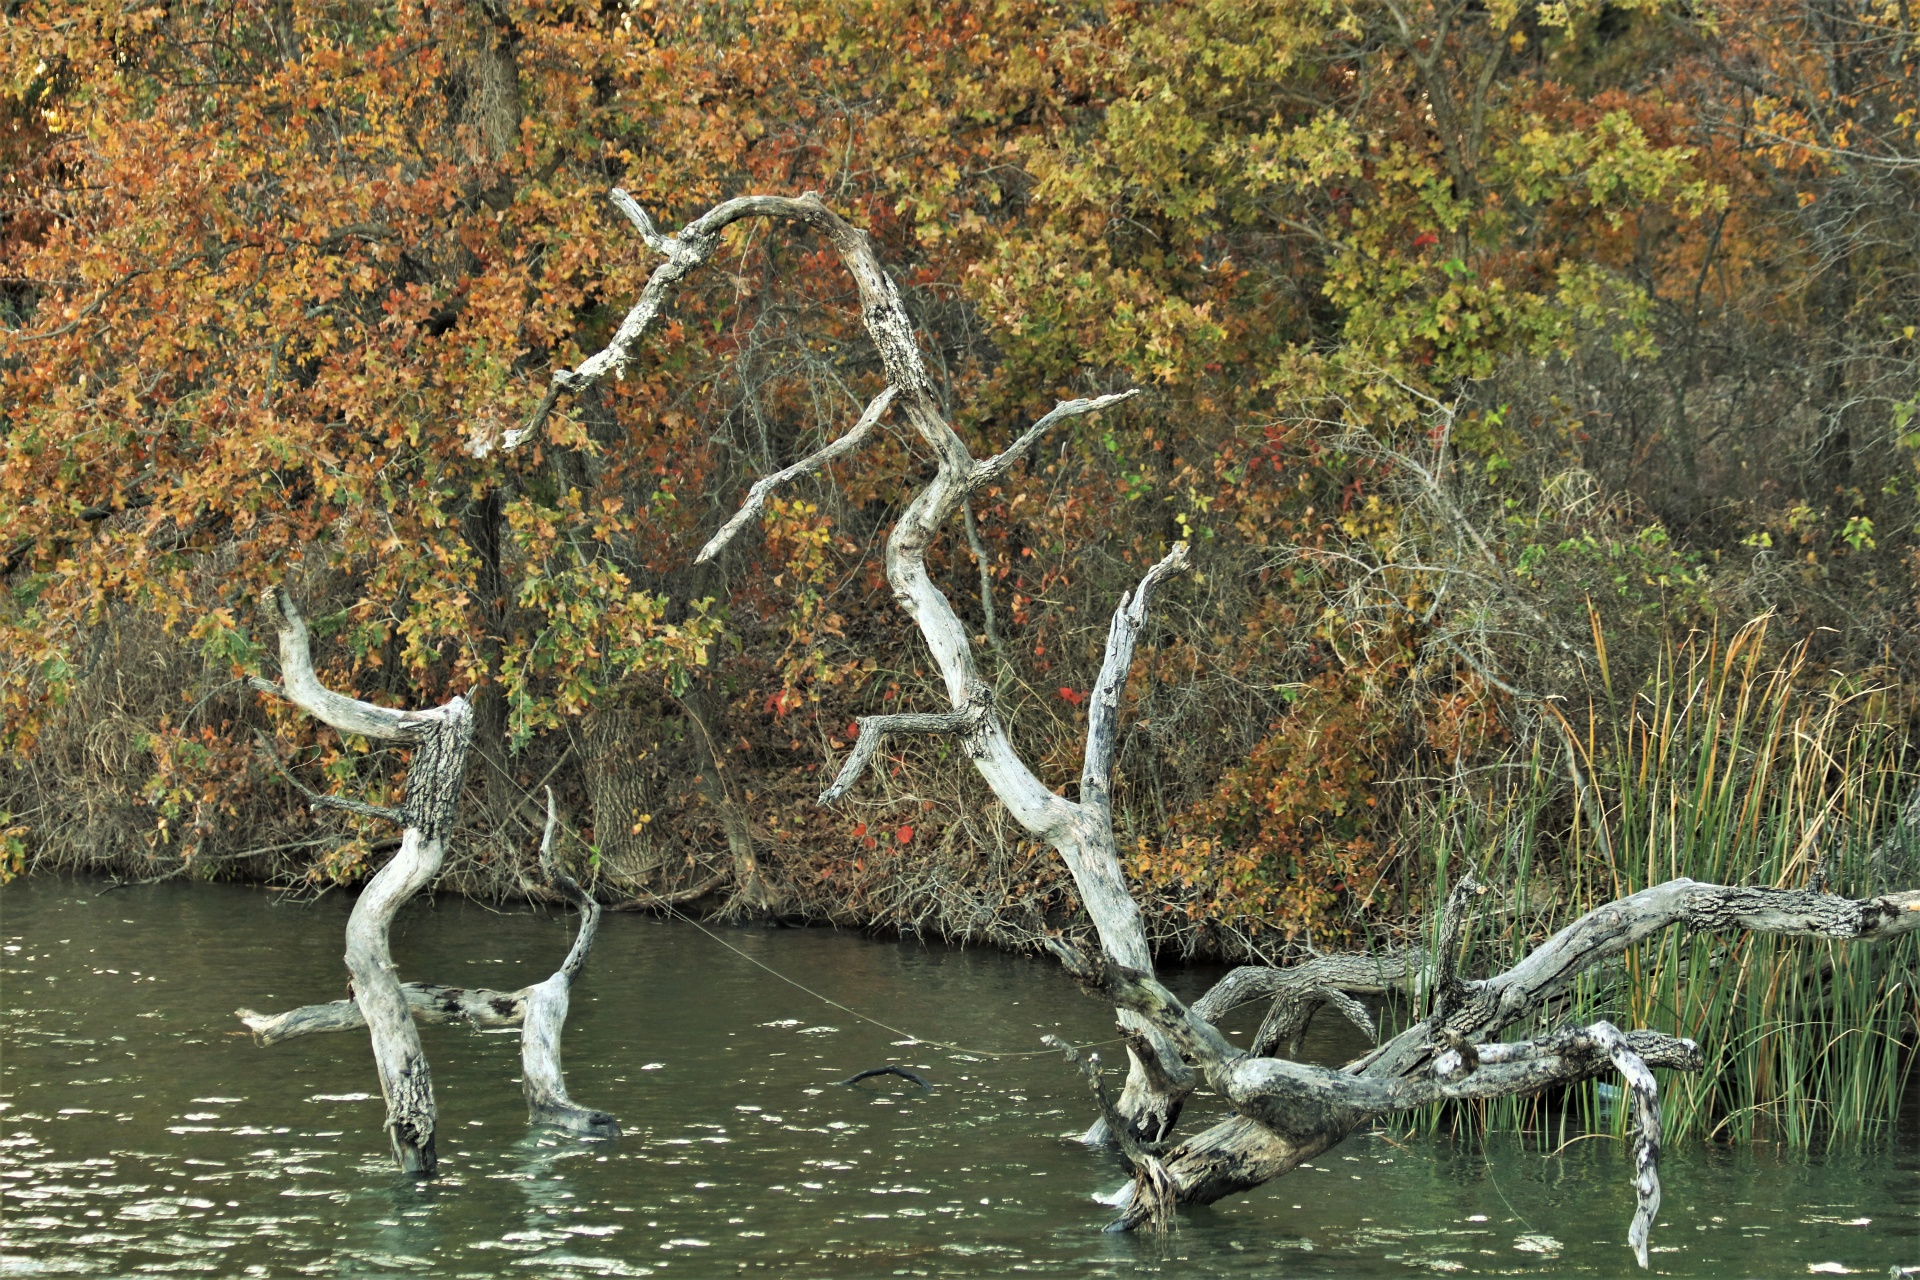 Two pieces of driftwood, one resembling a dragon and one a dog, floating near the edge of a lake, with gold, yellow and green autumn leaves in the background.